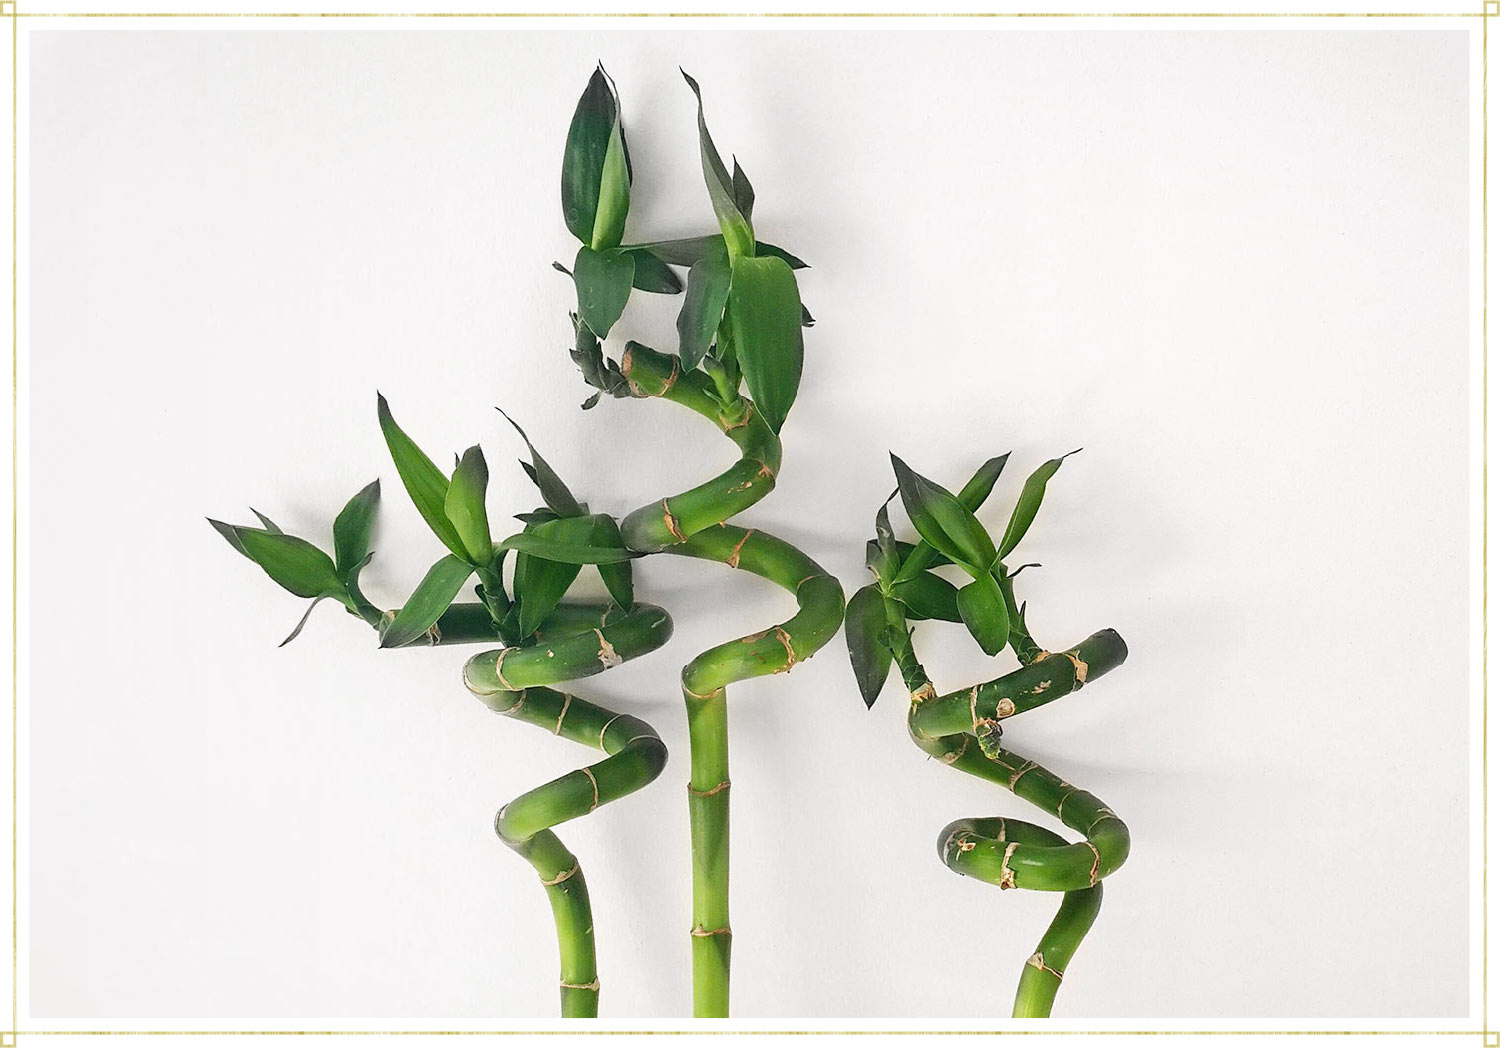 Lucky Bamboo Care Guide Growing Tips + Facts   ProFlowers Blog